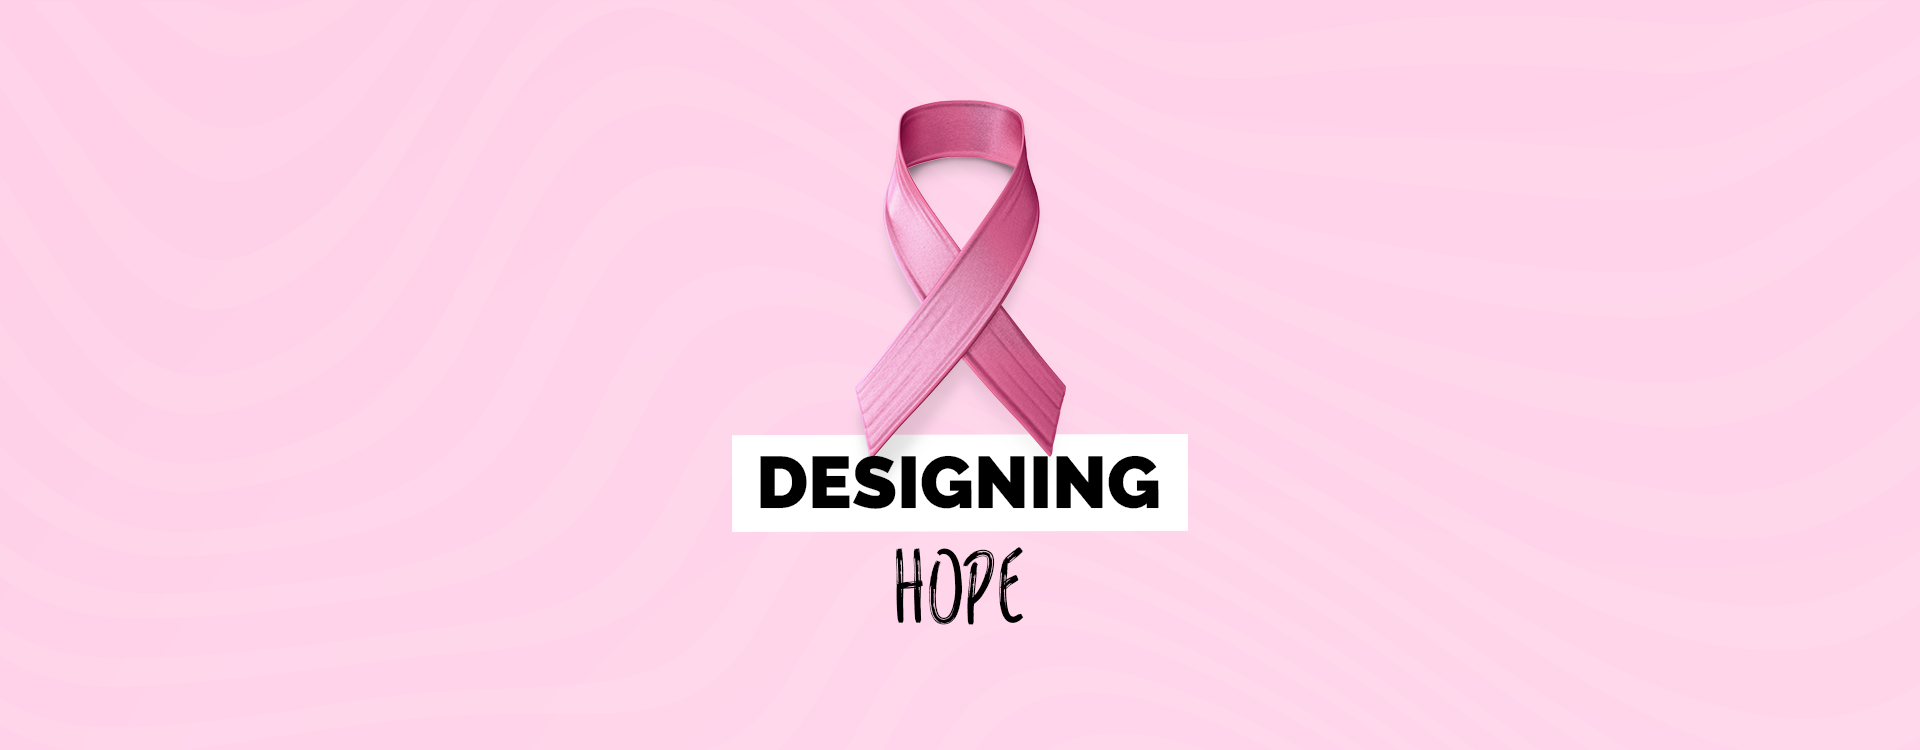 Painting Dubai Pink: La Mesa’s Commitment to Breast Cancer Awareness Month